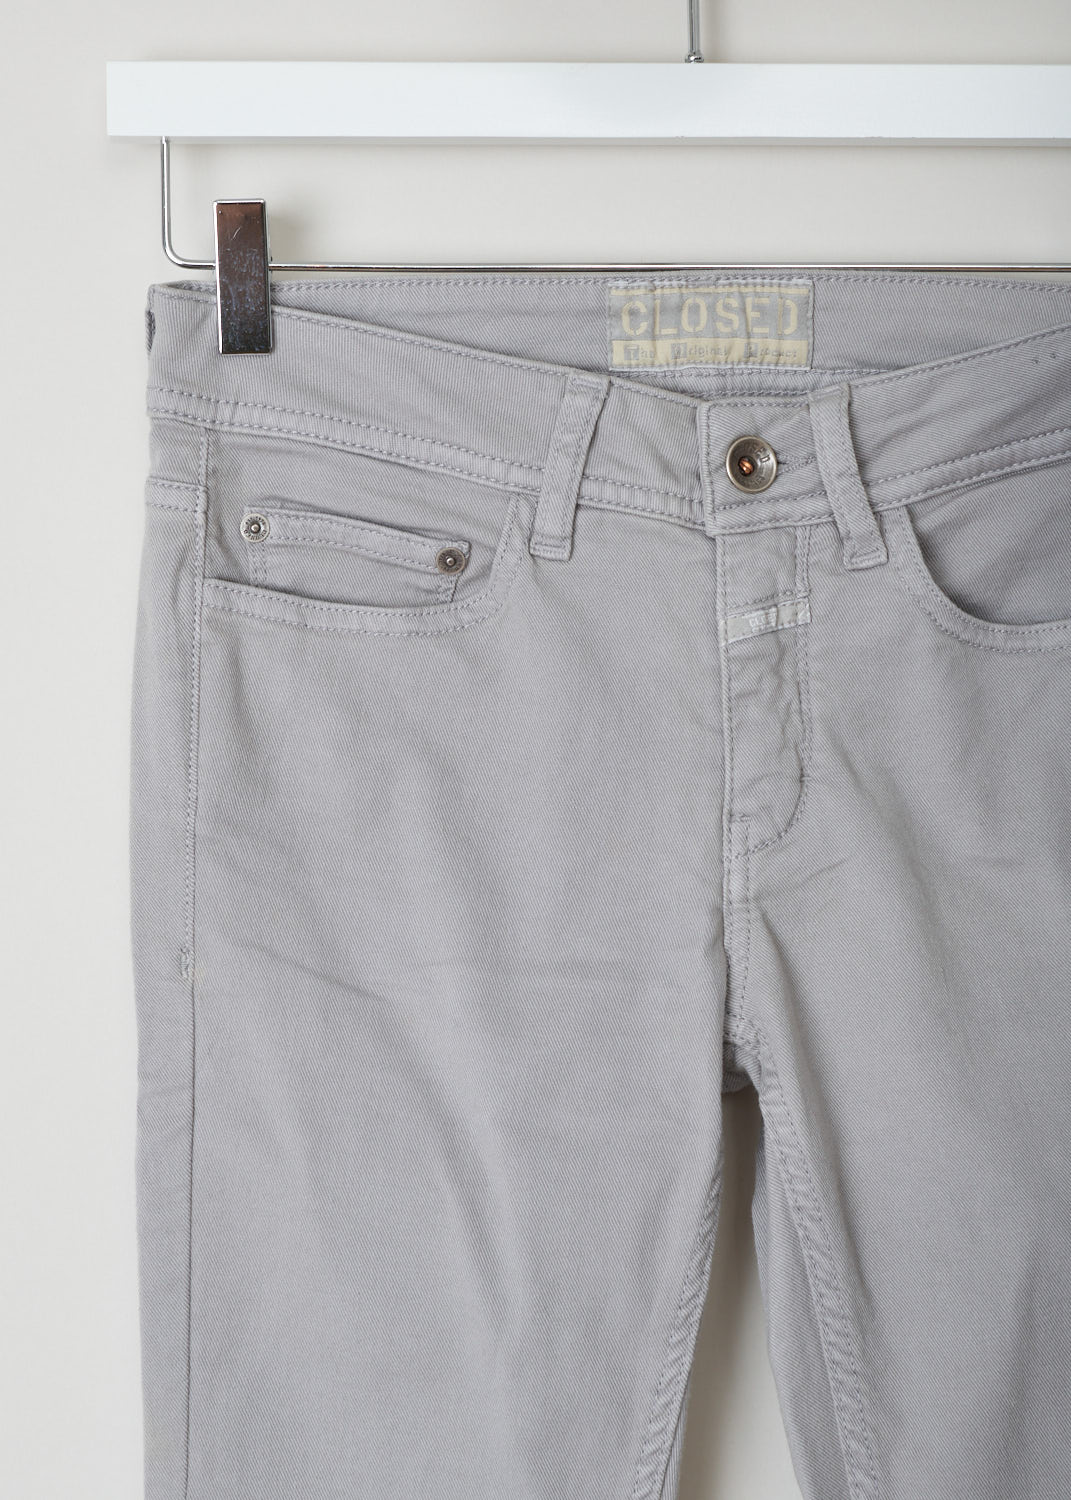 Closed, Grey colored jeans, baker_C91833_07N_3L_124, grey, detail, Mid-waist slim-fit jeans made with cropped length, to show off any shoe you are wearing. Comes with the traditional 5 pockets and as you fastening option you get a zipper and button on the front. 